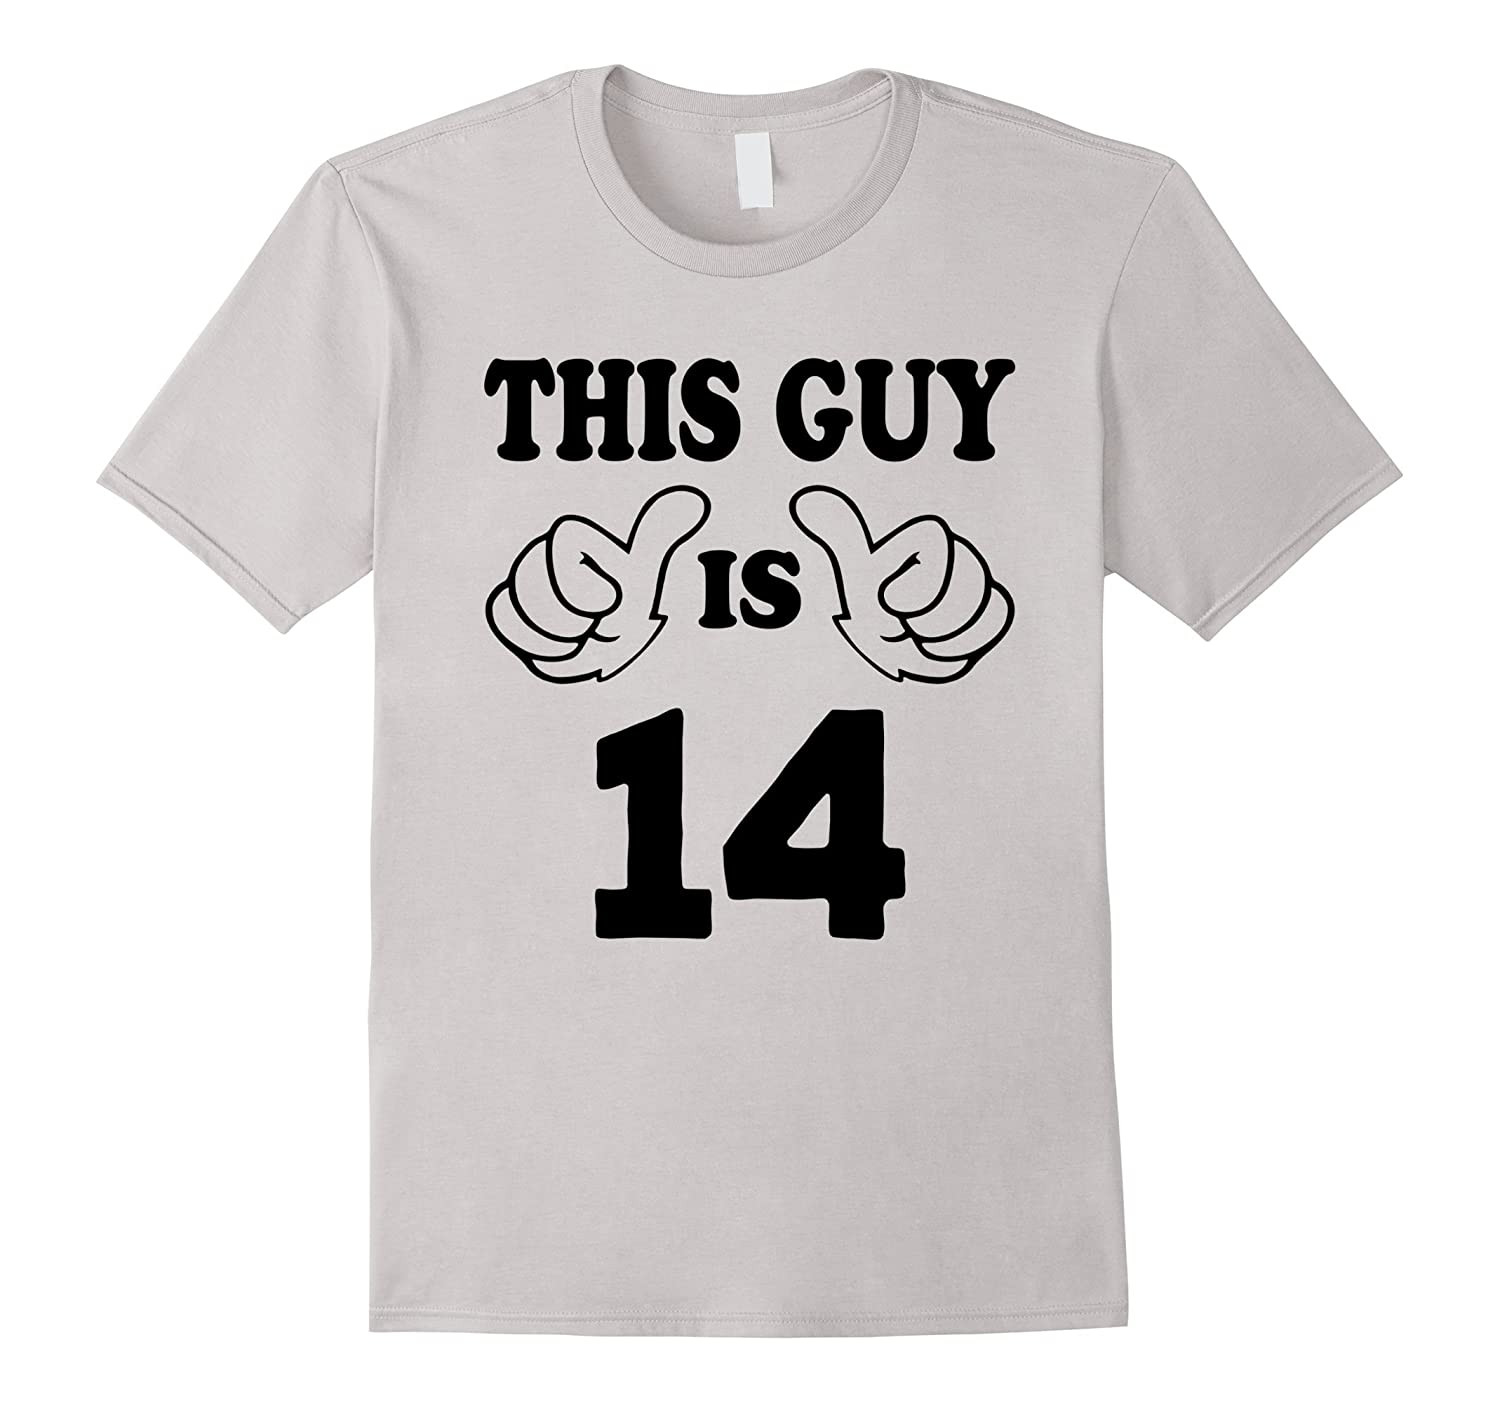 14 Year Old Birthday Gift Ideas
 This Guy is fourteen 14 Years Old 14th Birthday Gift Ideas